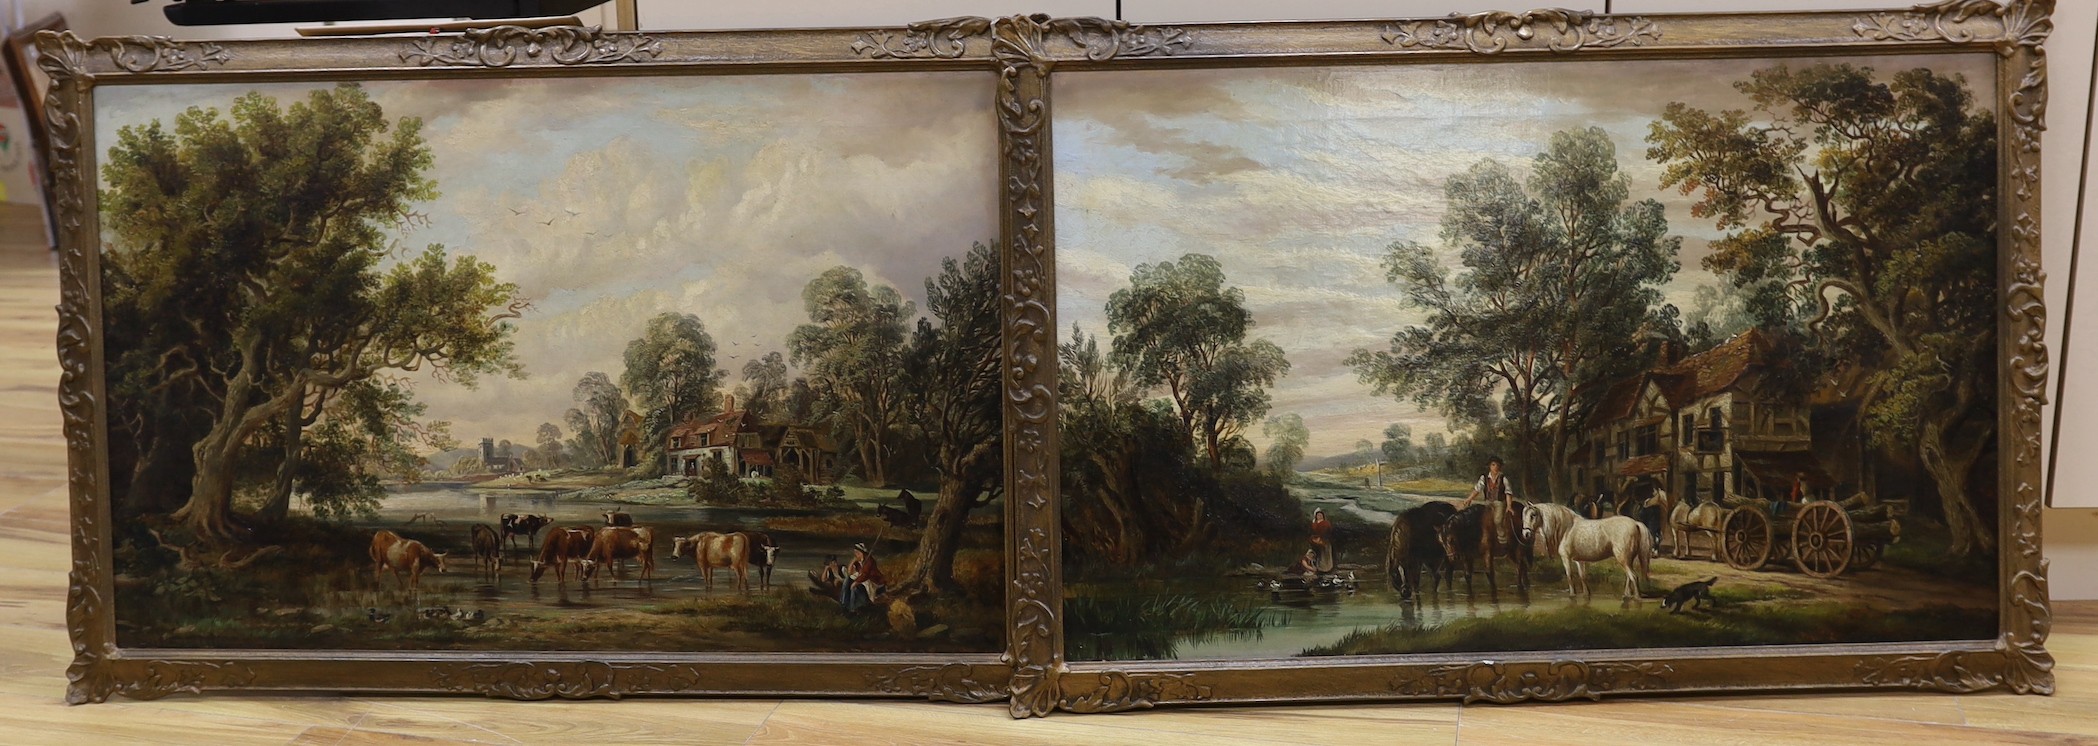 J. Riccardo (19th C.), pair of oils on canvas, Pastoral landscapes, signed and dated 1882, 60 x 96cm